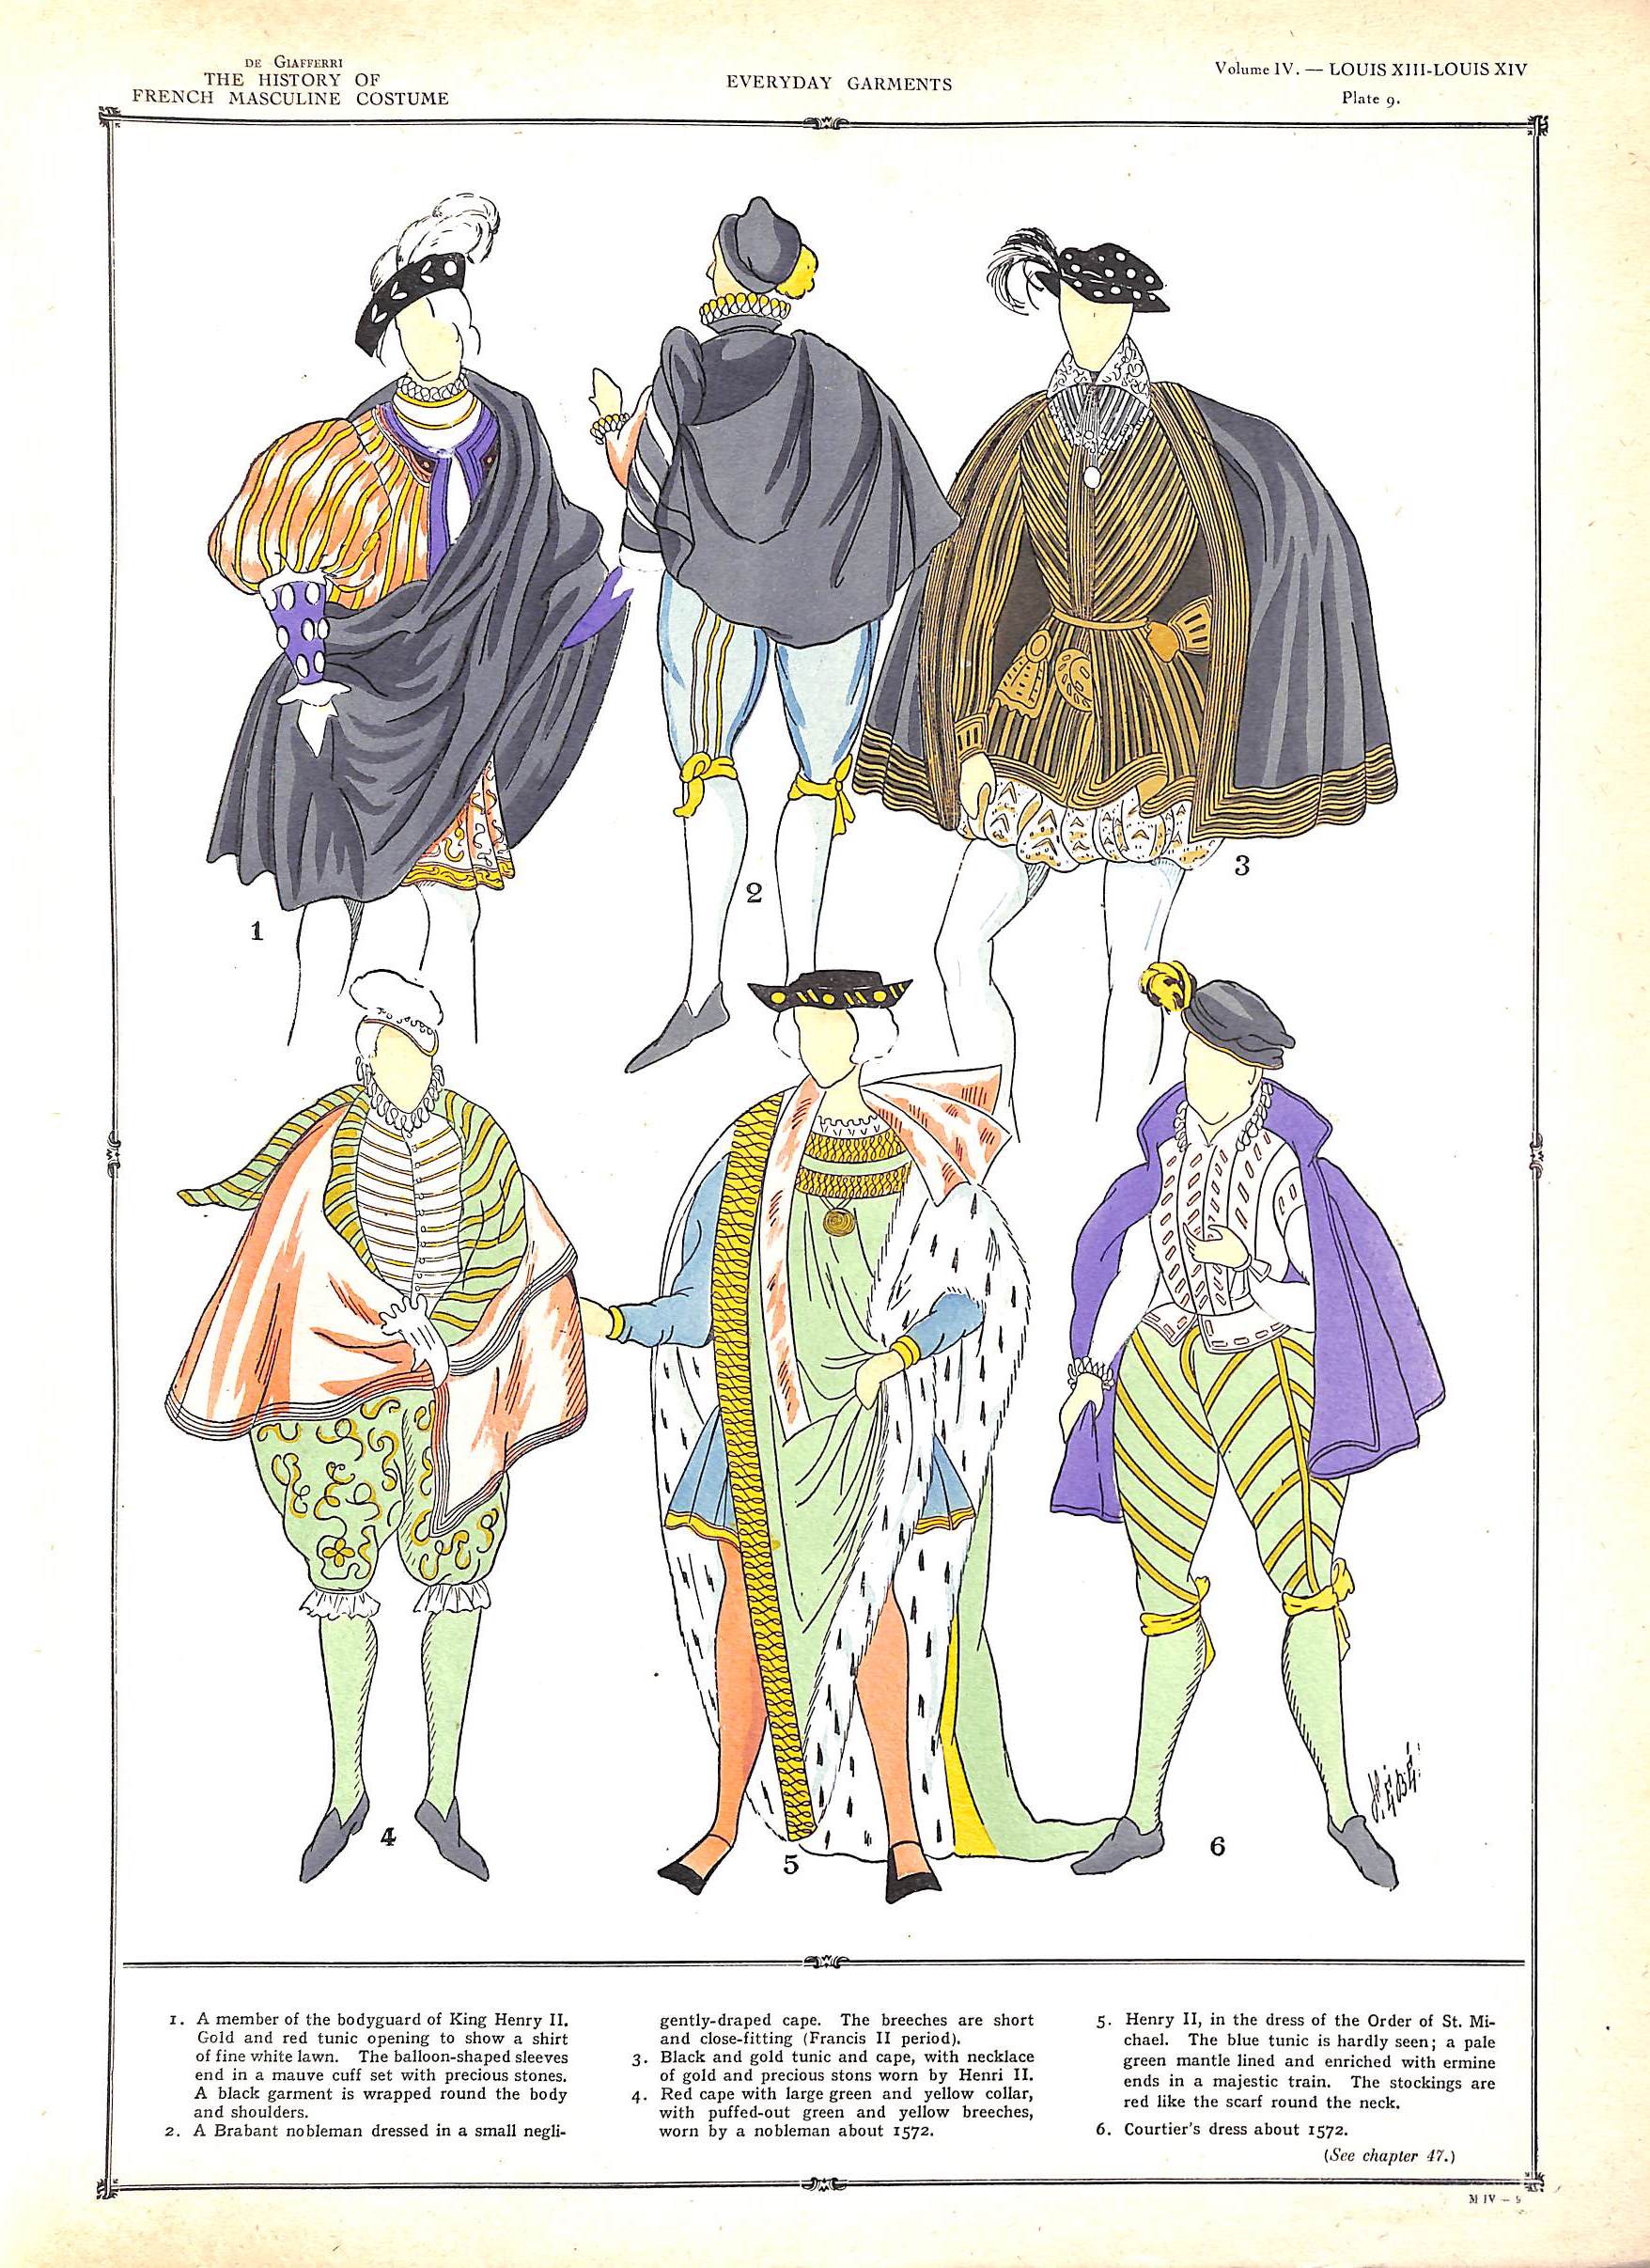 The History Of French Masculine Costume During Twenty-Four Centuries by  GIAFFERRI, Paul-Louis De: Very Good Hardcover (1927)